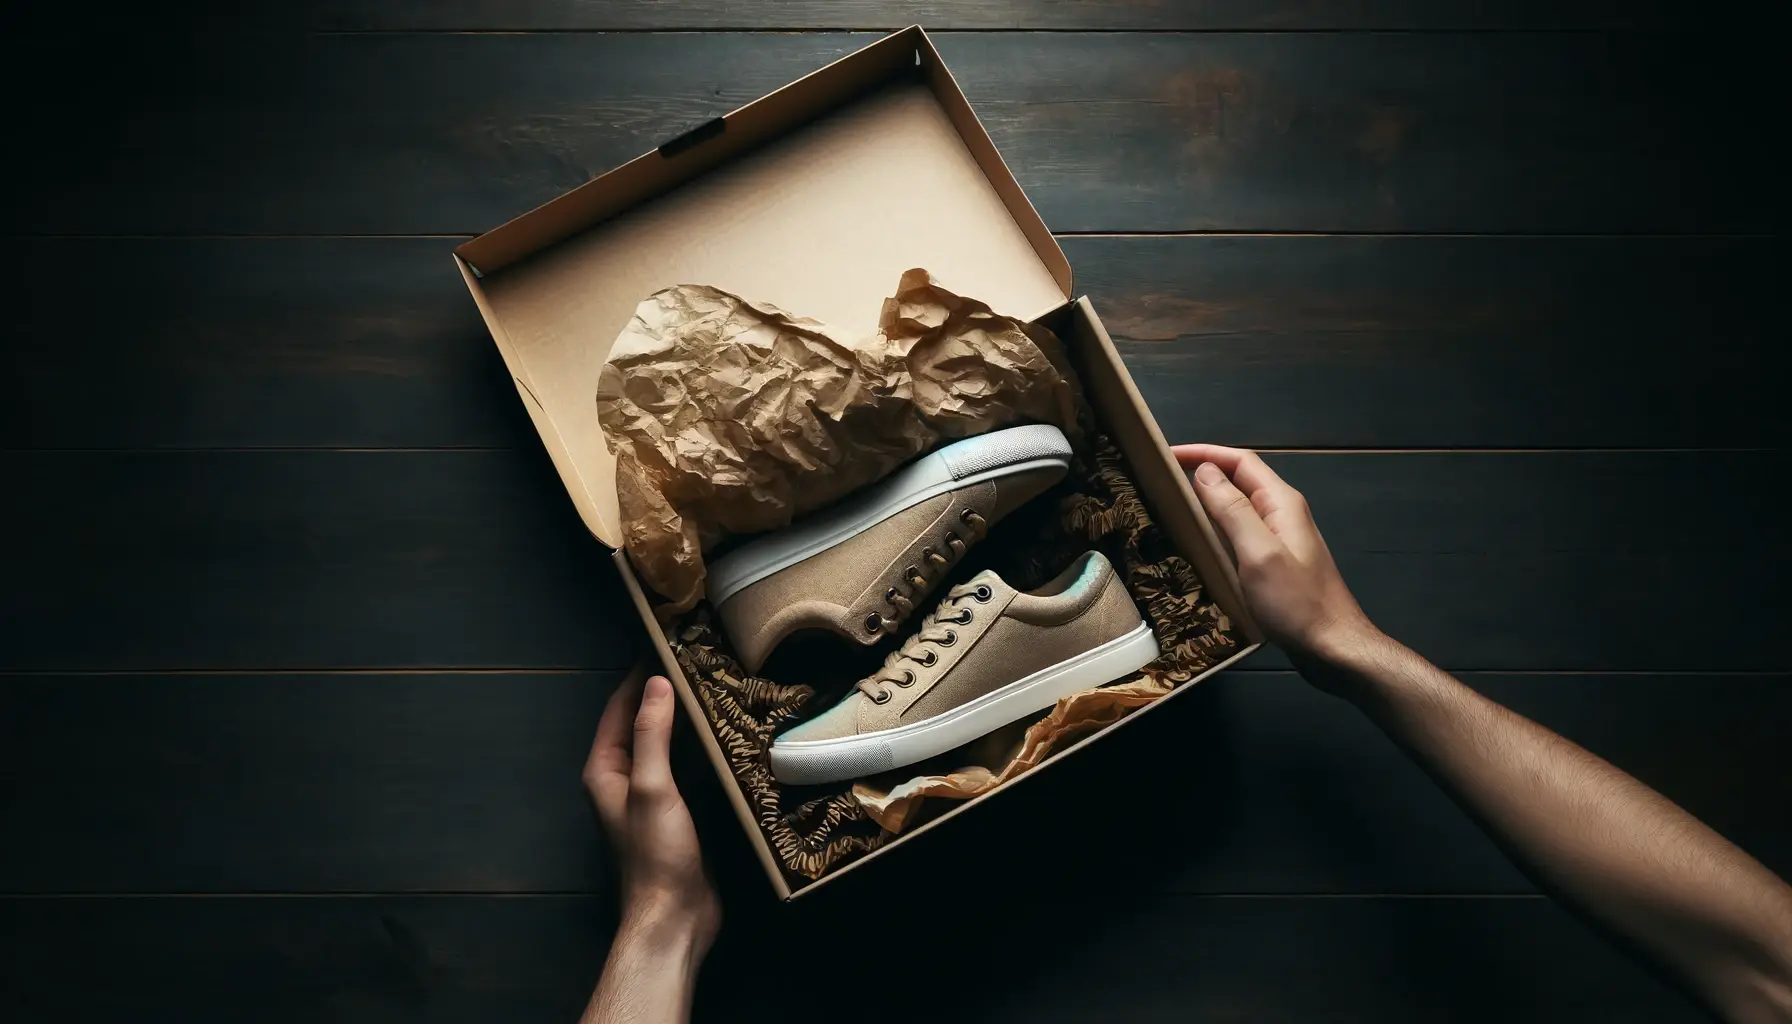 Open cardboard shoebox on a dark wood surface containing a pair of sneakers, with crinkled paper filling.